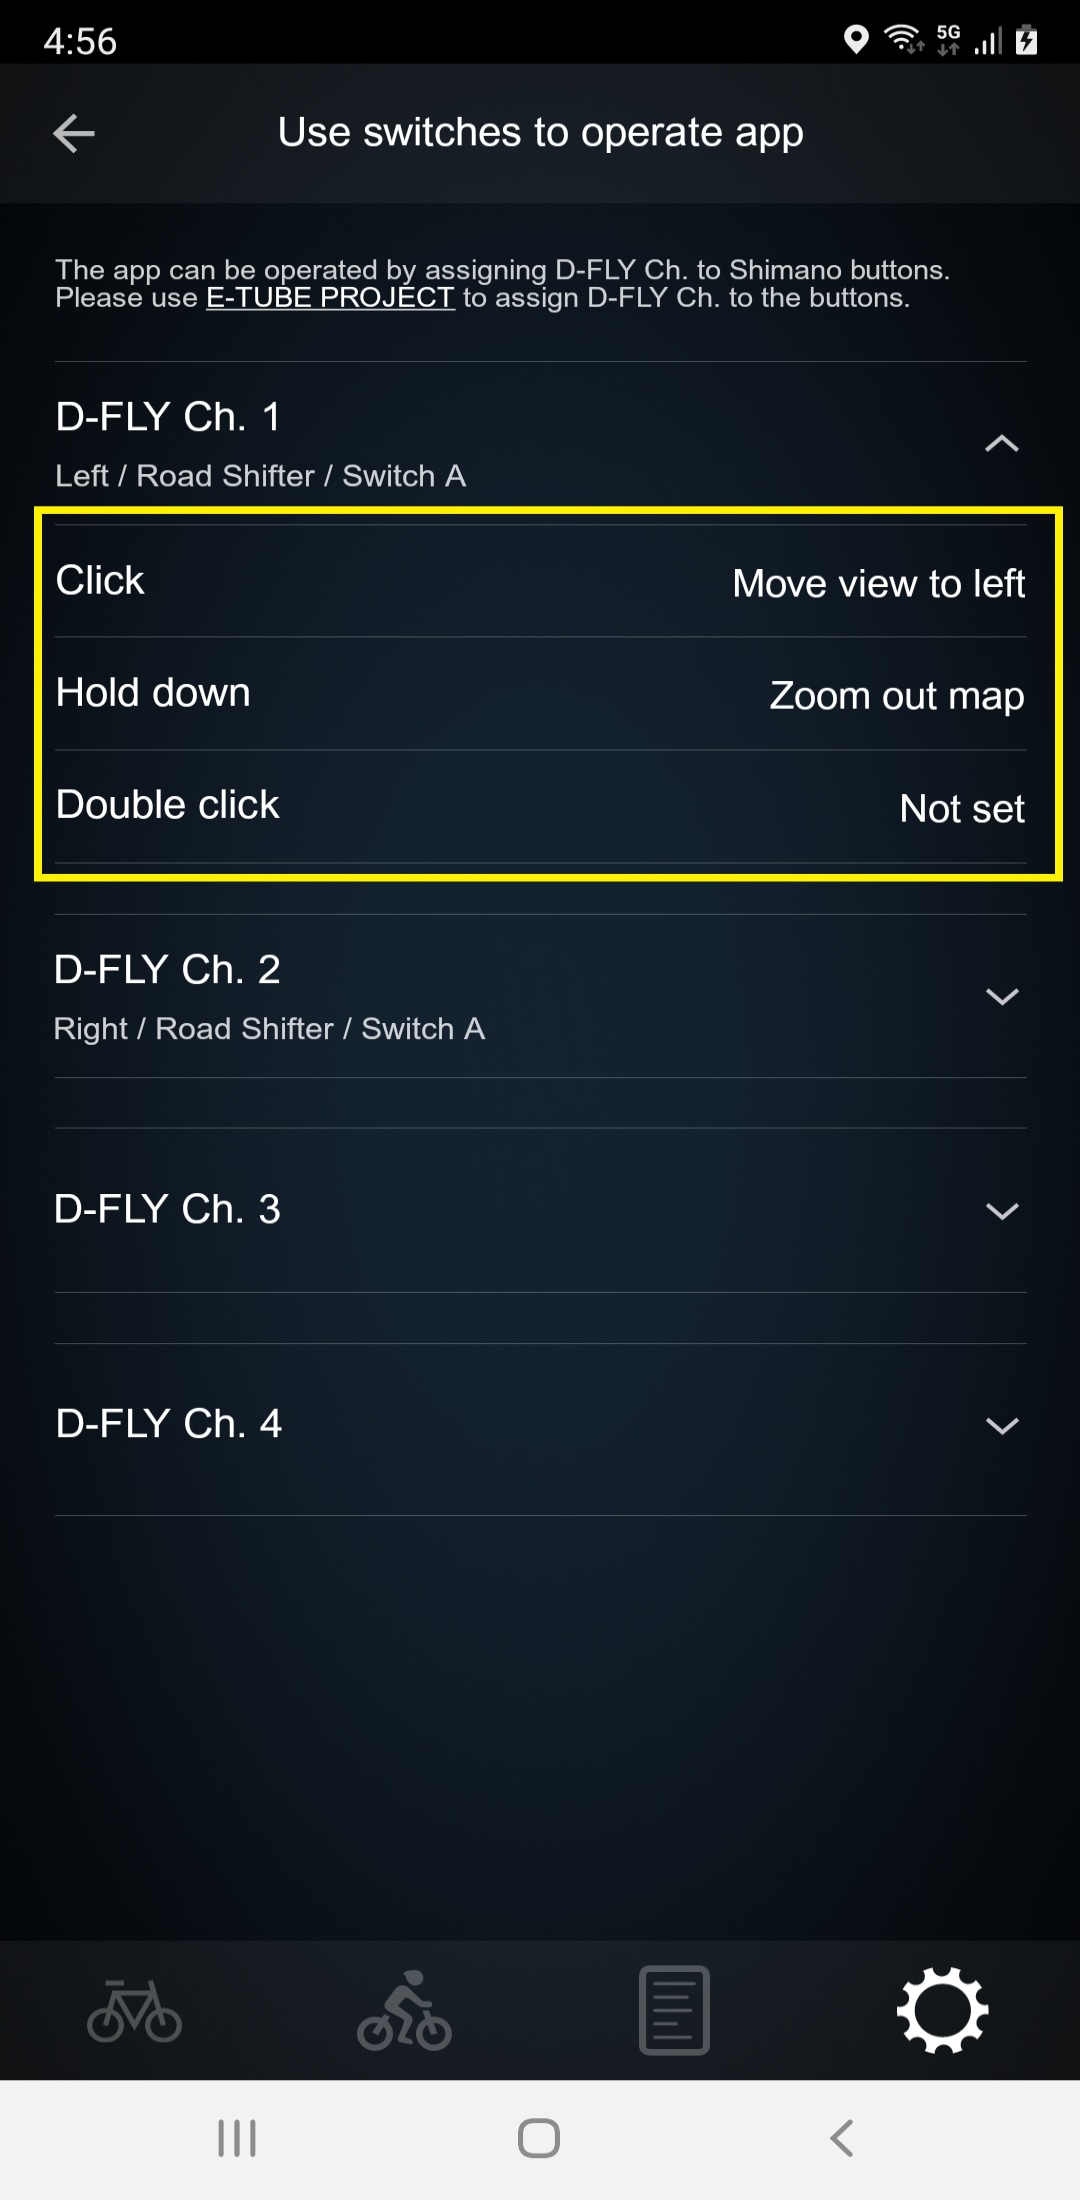 Select the D-FLY channel and action you specified in E-TUBE PROJECT.